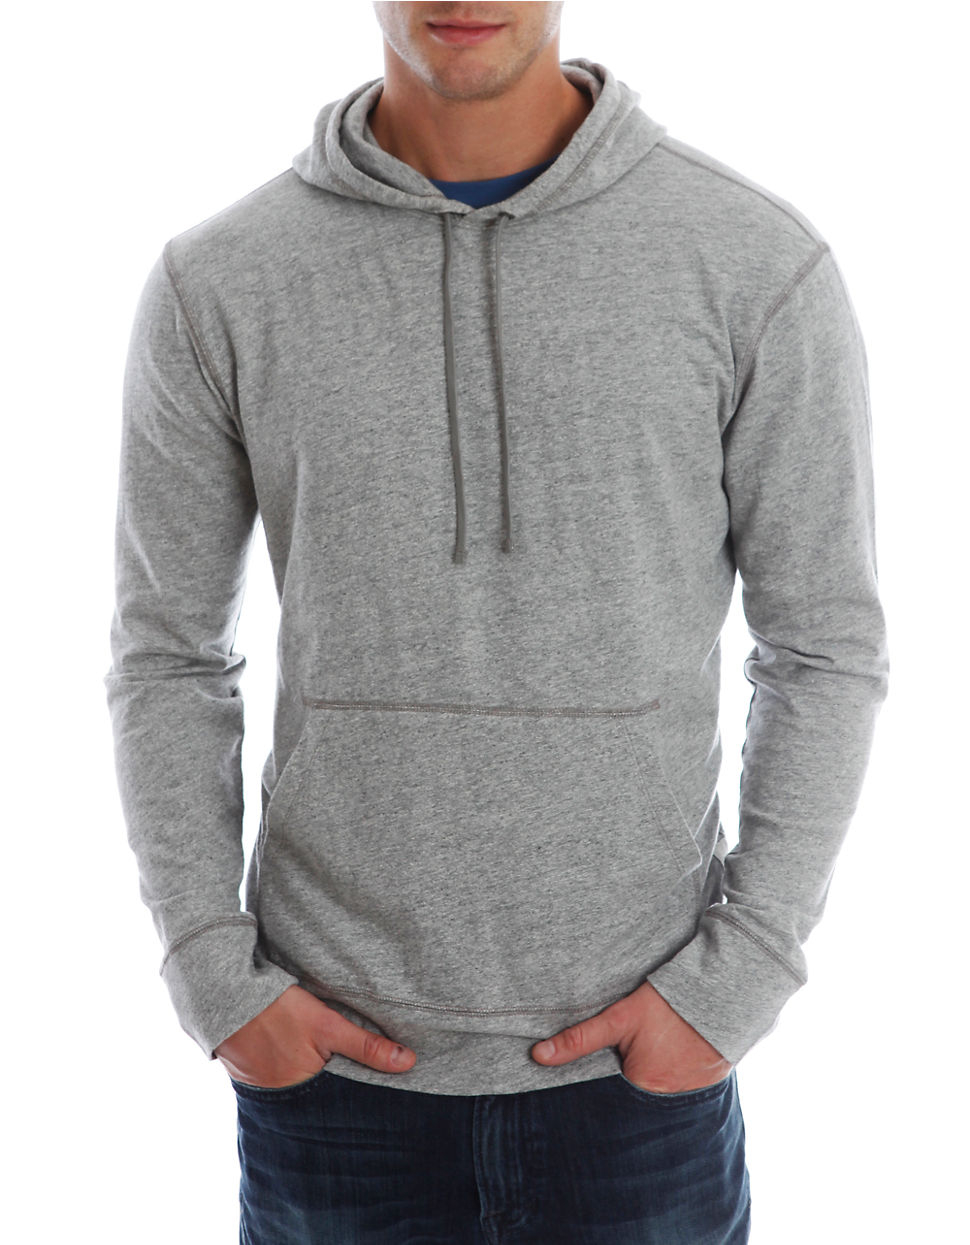 Lucky Brand Grey Label Active Hoodie in Heather Grey (Gray) for Men - Lyst